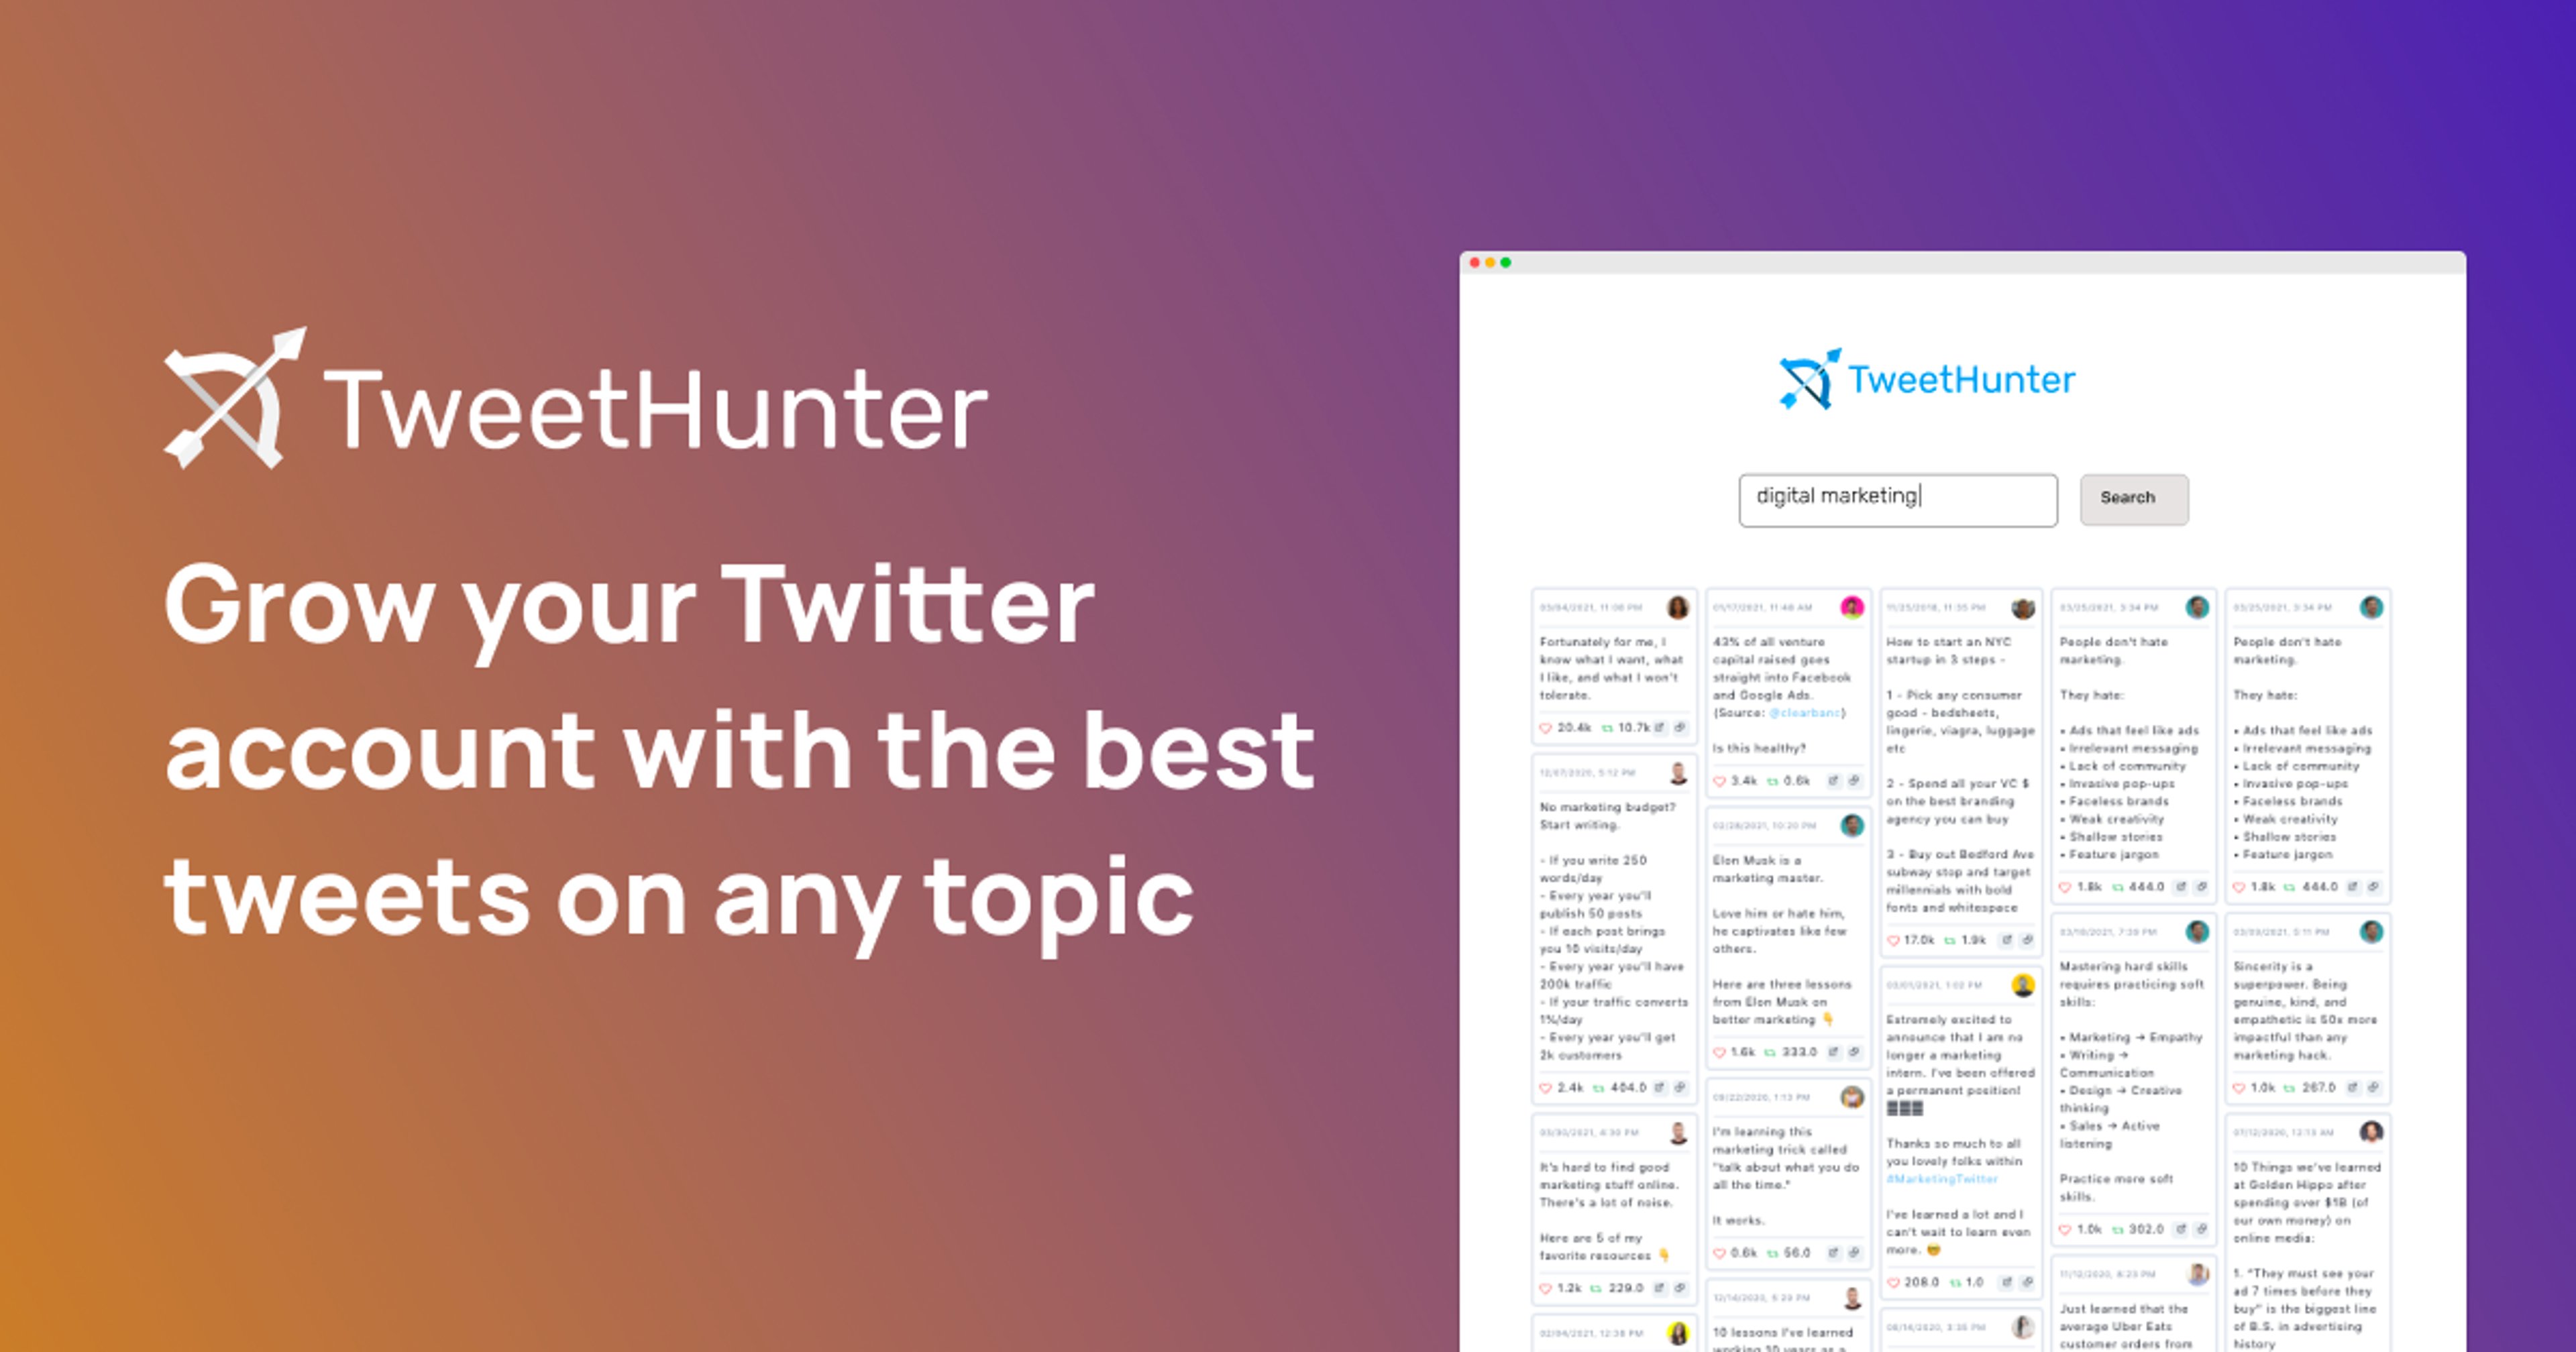 How Tweethunter went from $0 to $1M ARR in 12 months